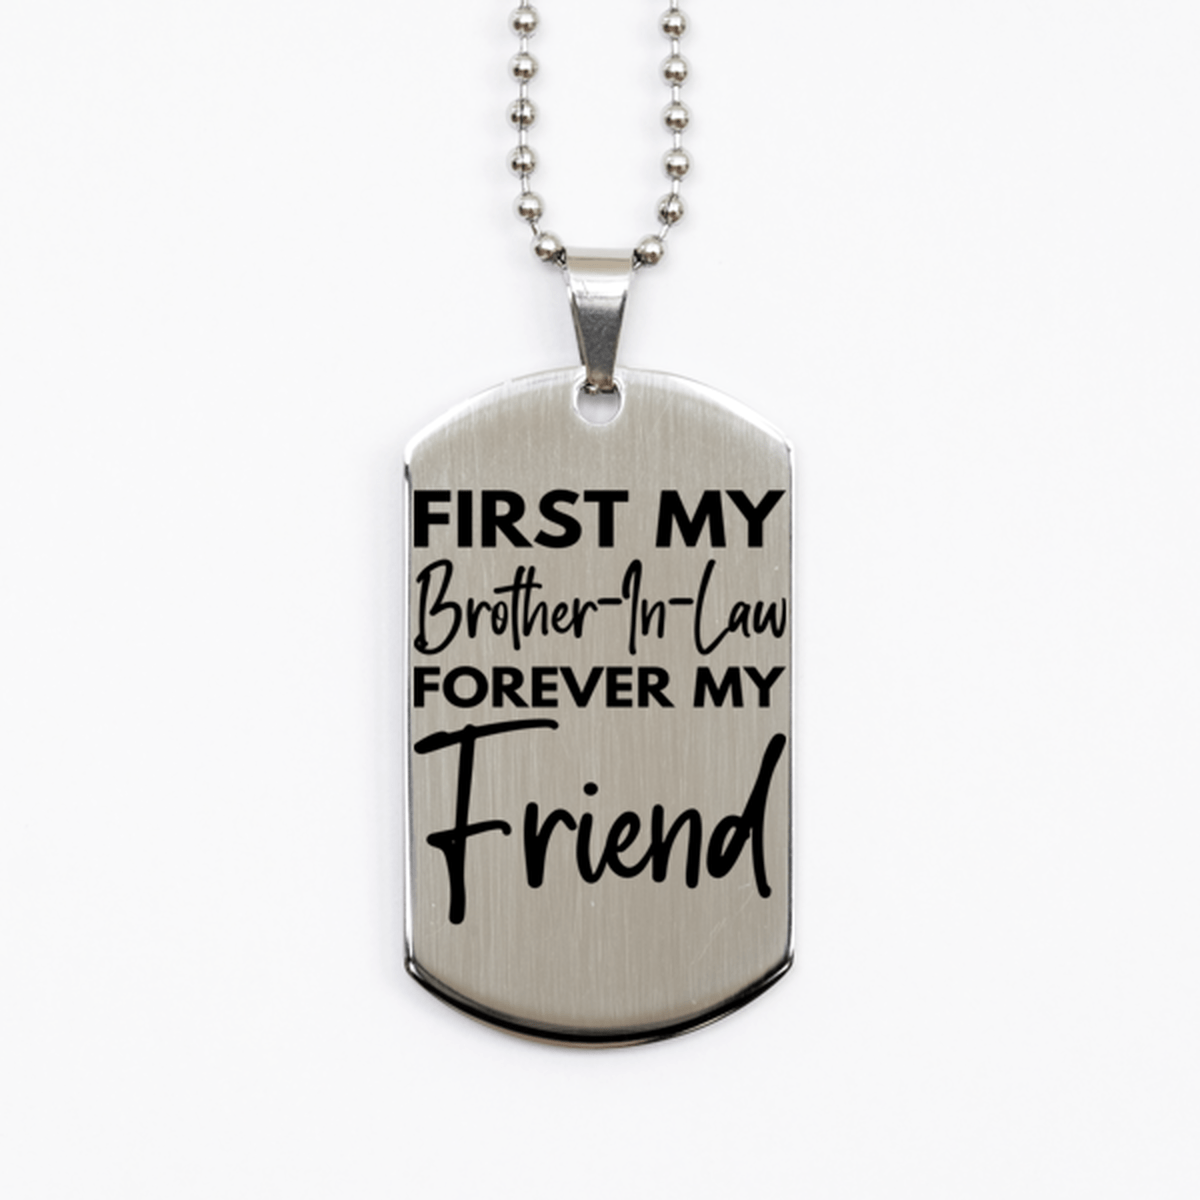 Inspirational Brother-In-Law Silver Dog Tag Necklace, First My Brother-In-Law Forever My Friend, Best Birthday Gifts for Brother-In-Law